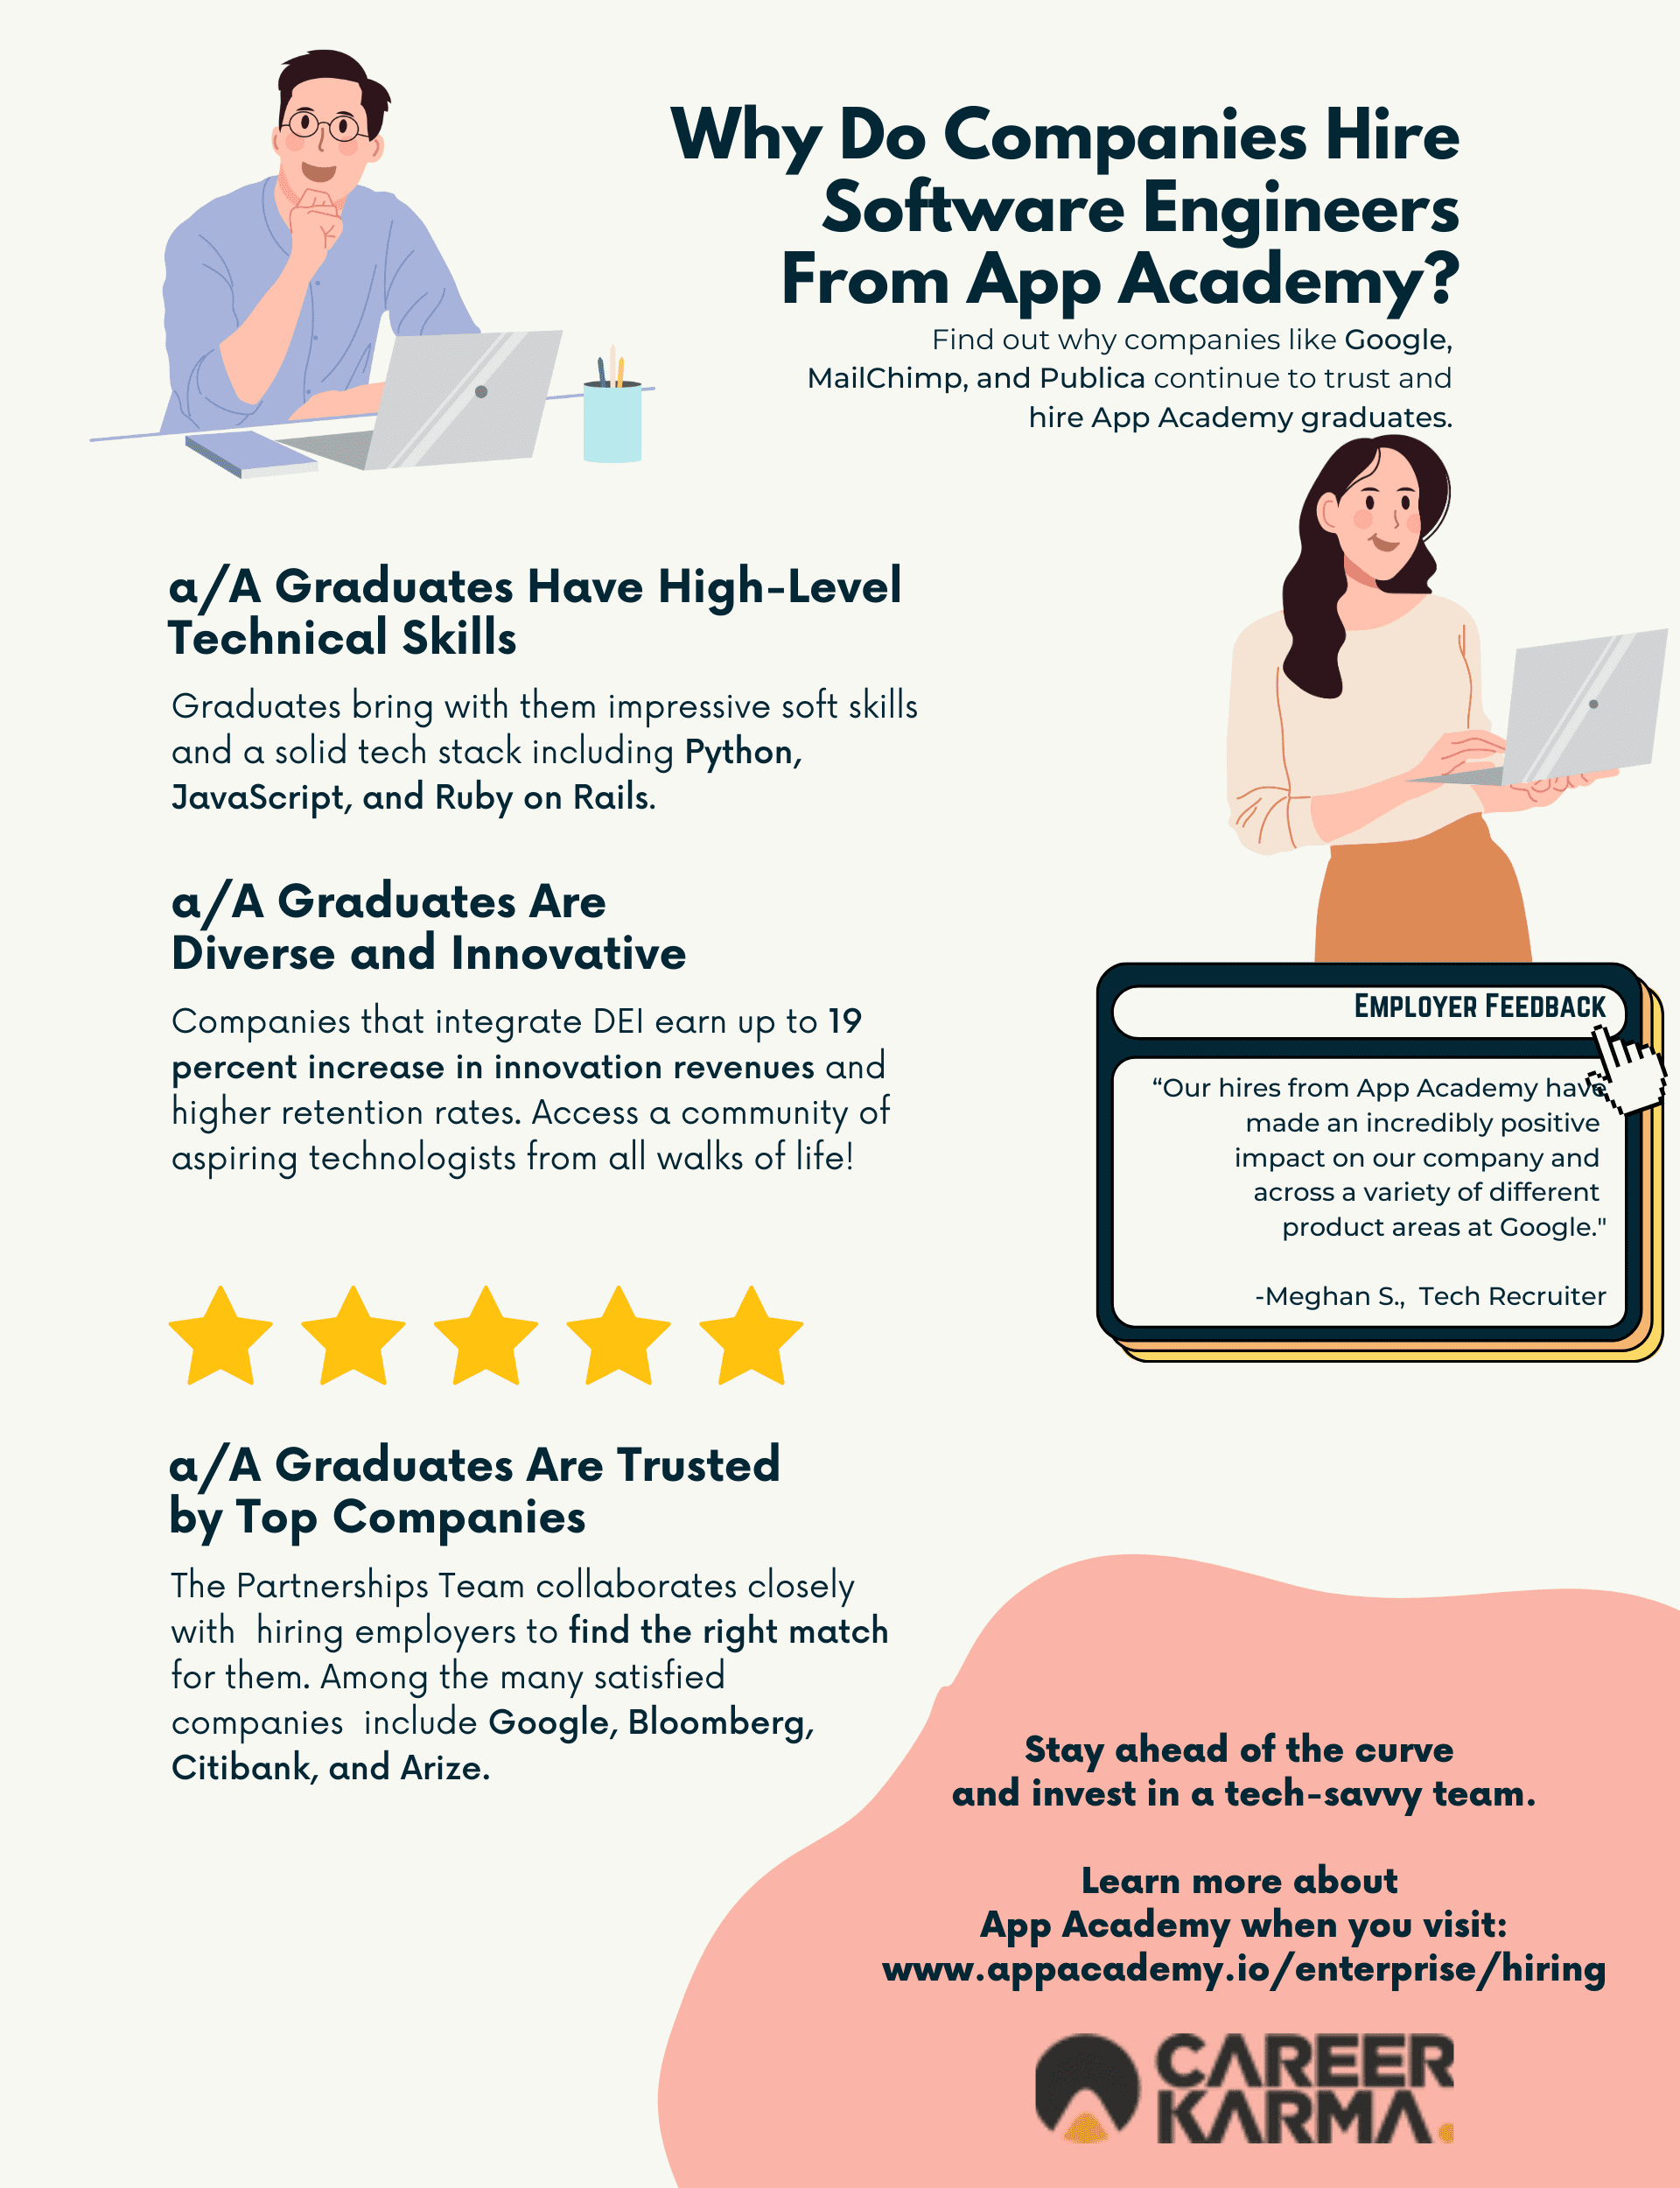 An infographic highlighting three reasons to hire App Academy software engineers